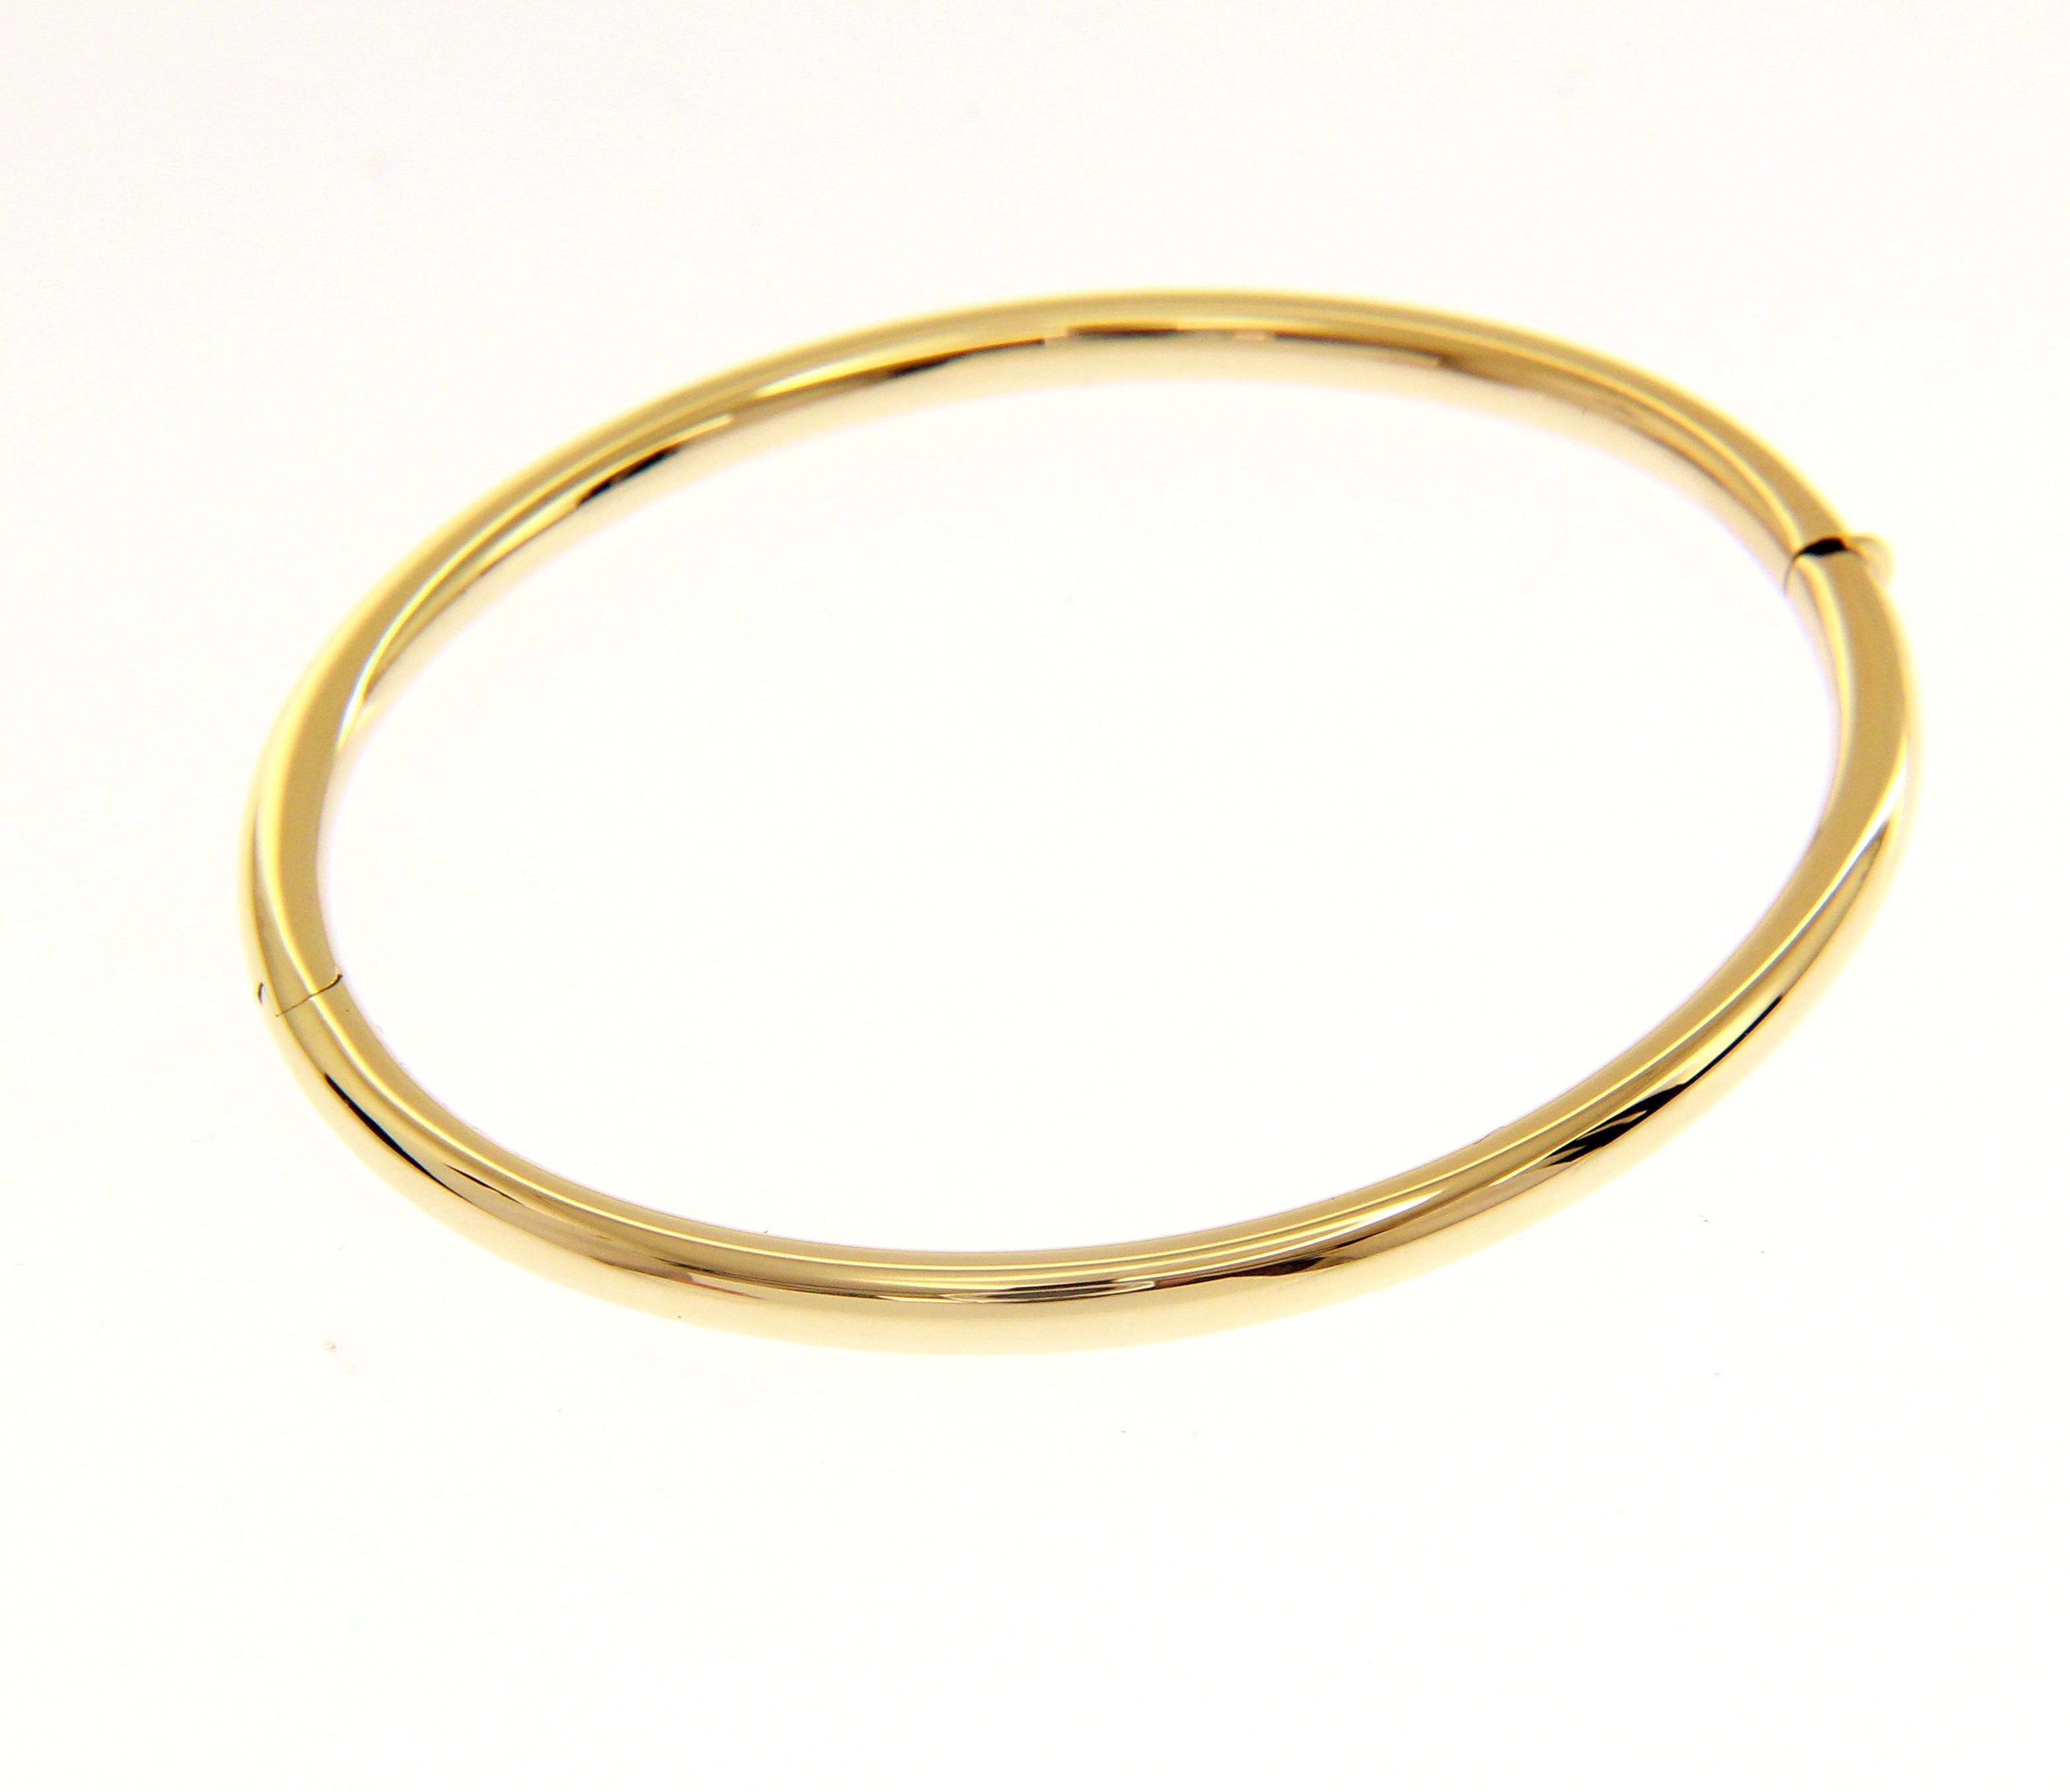 Golden oval bracelet with clasp k14 (code S205087)